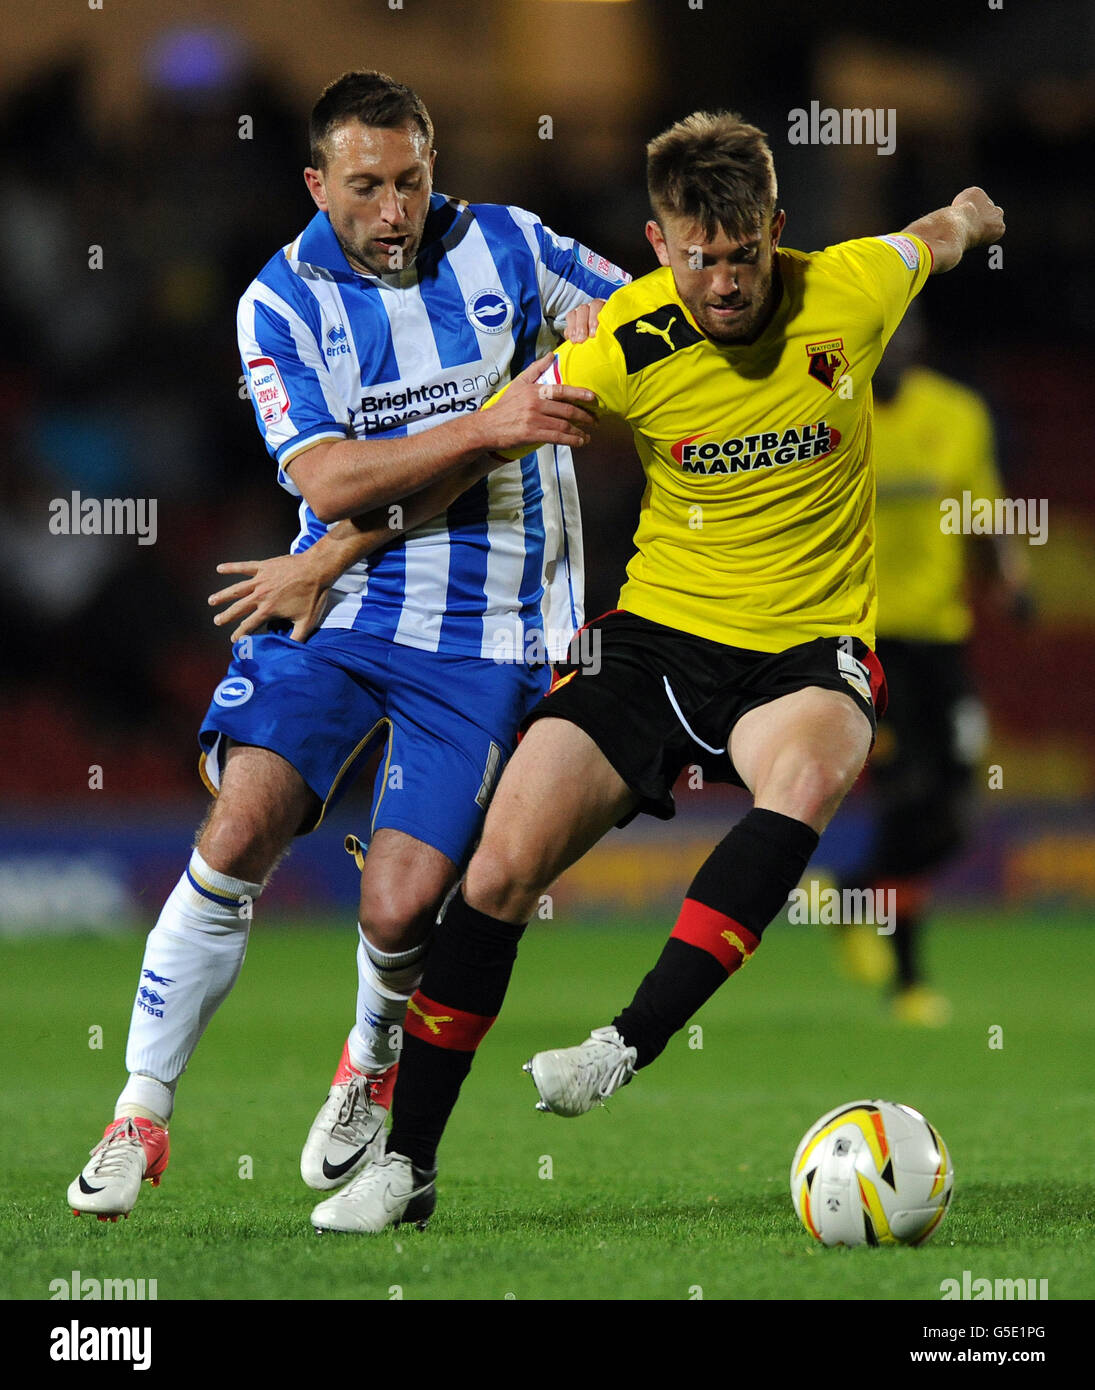 Brighton & Hove Albion's Stephen Dobbie (left) and Watford's Piccoli Neuton battle for the ball during the npower Championship match at Vicarage Road, Watford. Stock Photo